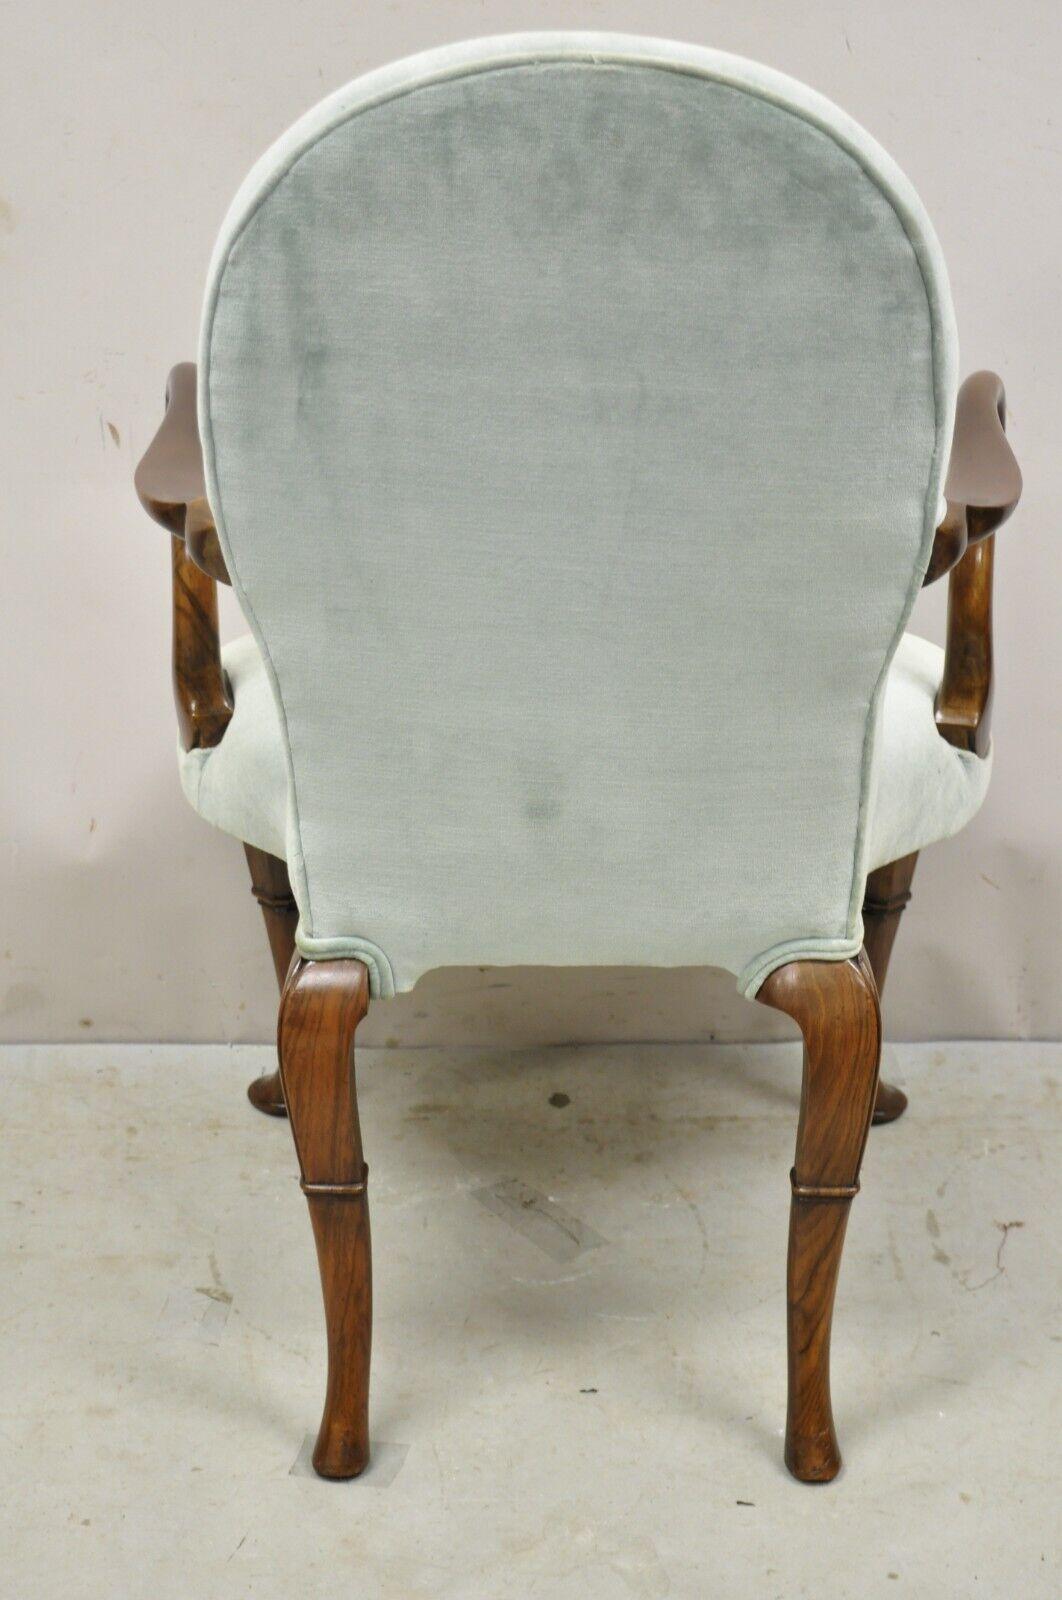 Vintage English Queen Anne Style Mahogany & Walnut Gooseneck Blue Arm Chair For Sale 6